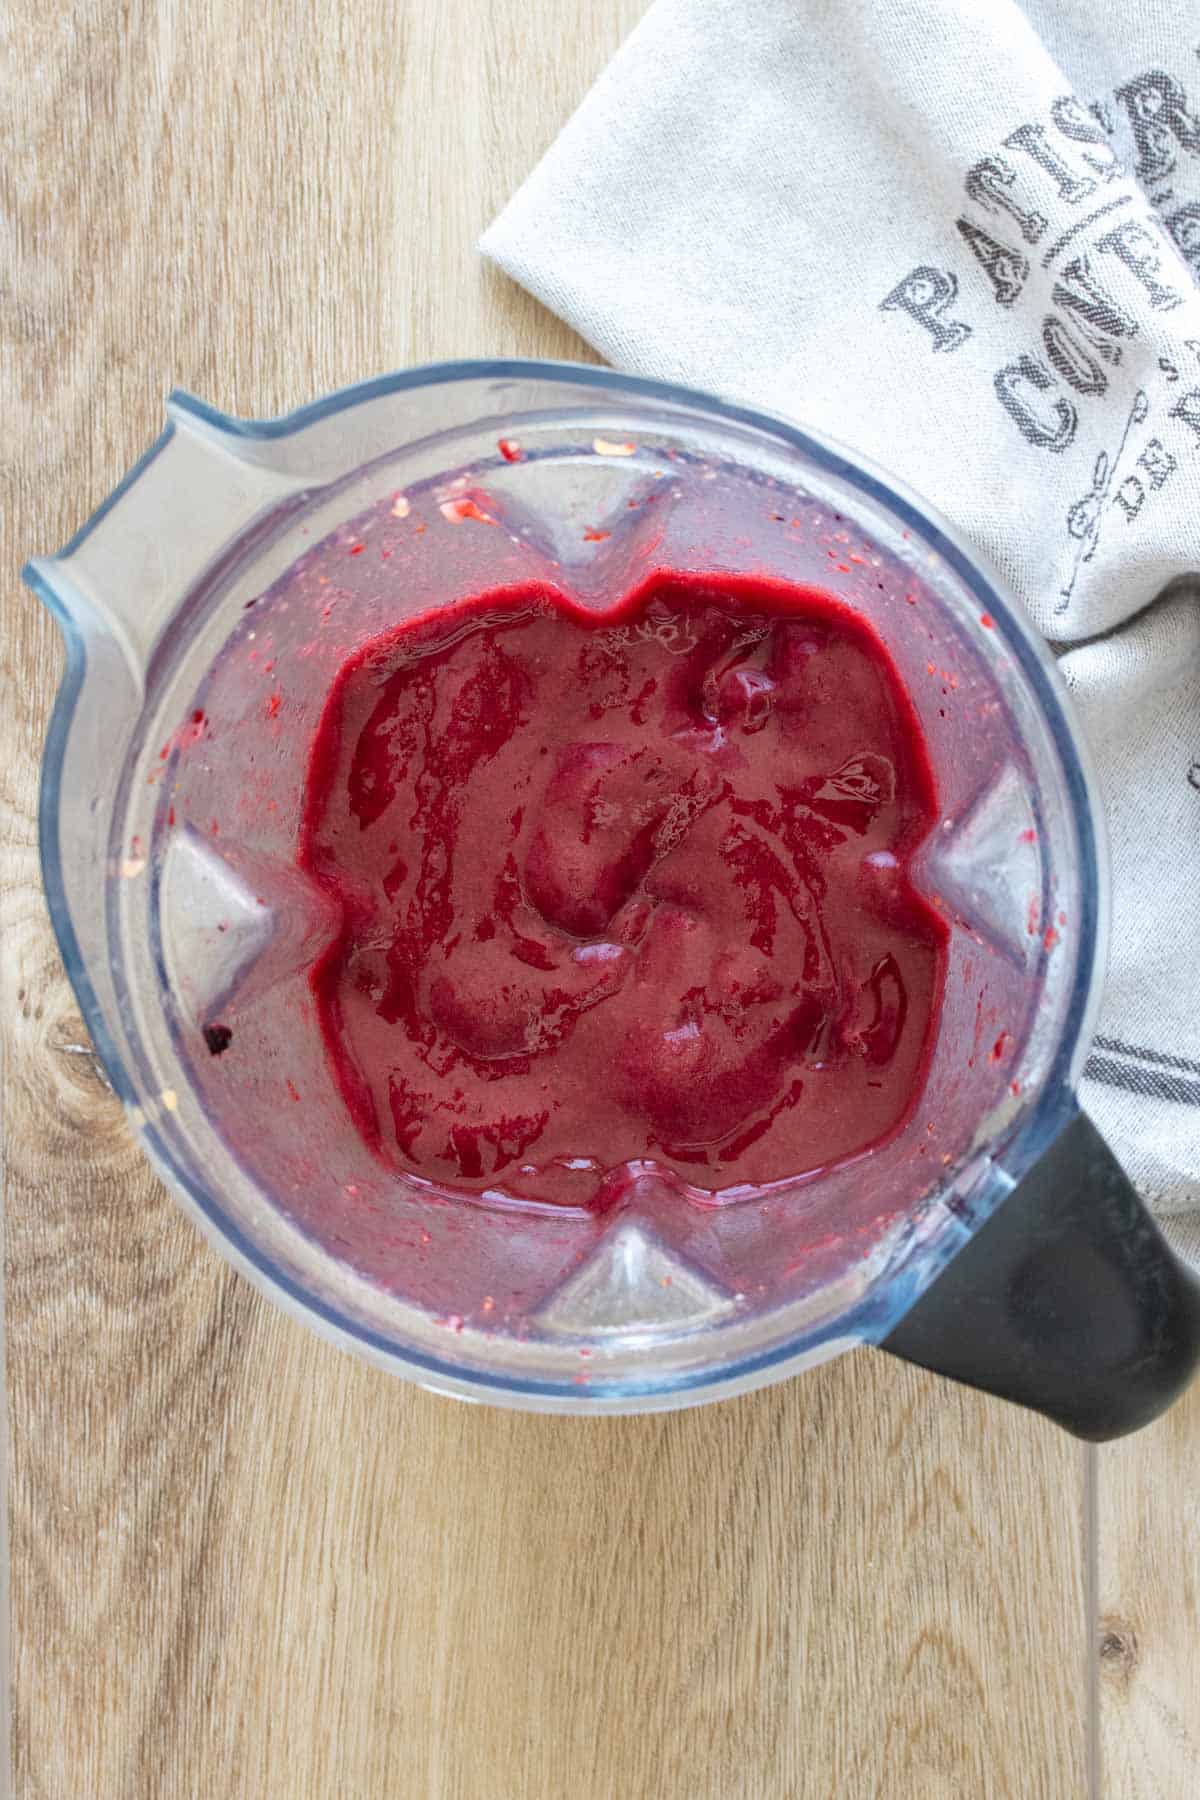 Top view of a blender with a deep purple pink frozen puree inside